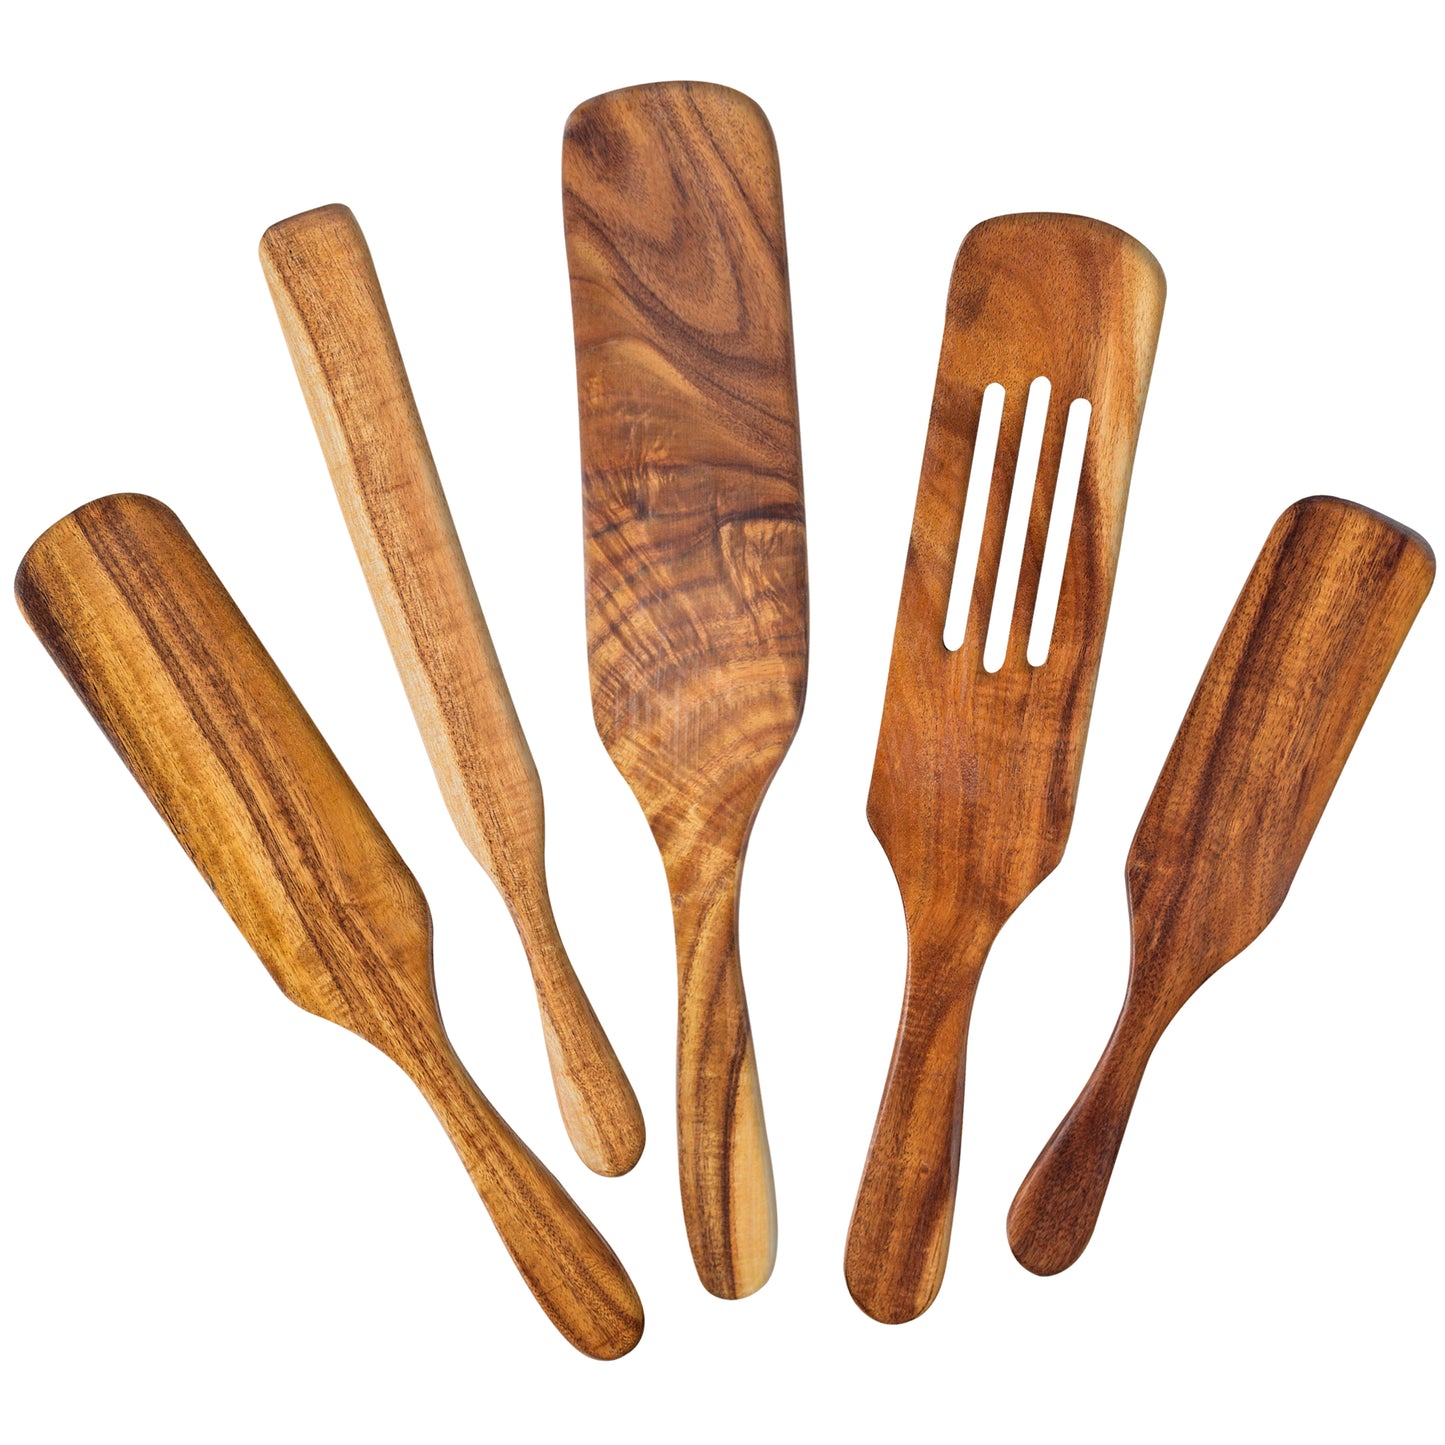 Wooden Spurtle Kitchen Tools Long Spatula Cooking Utensils